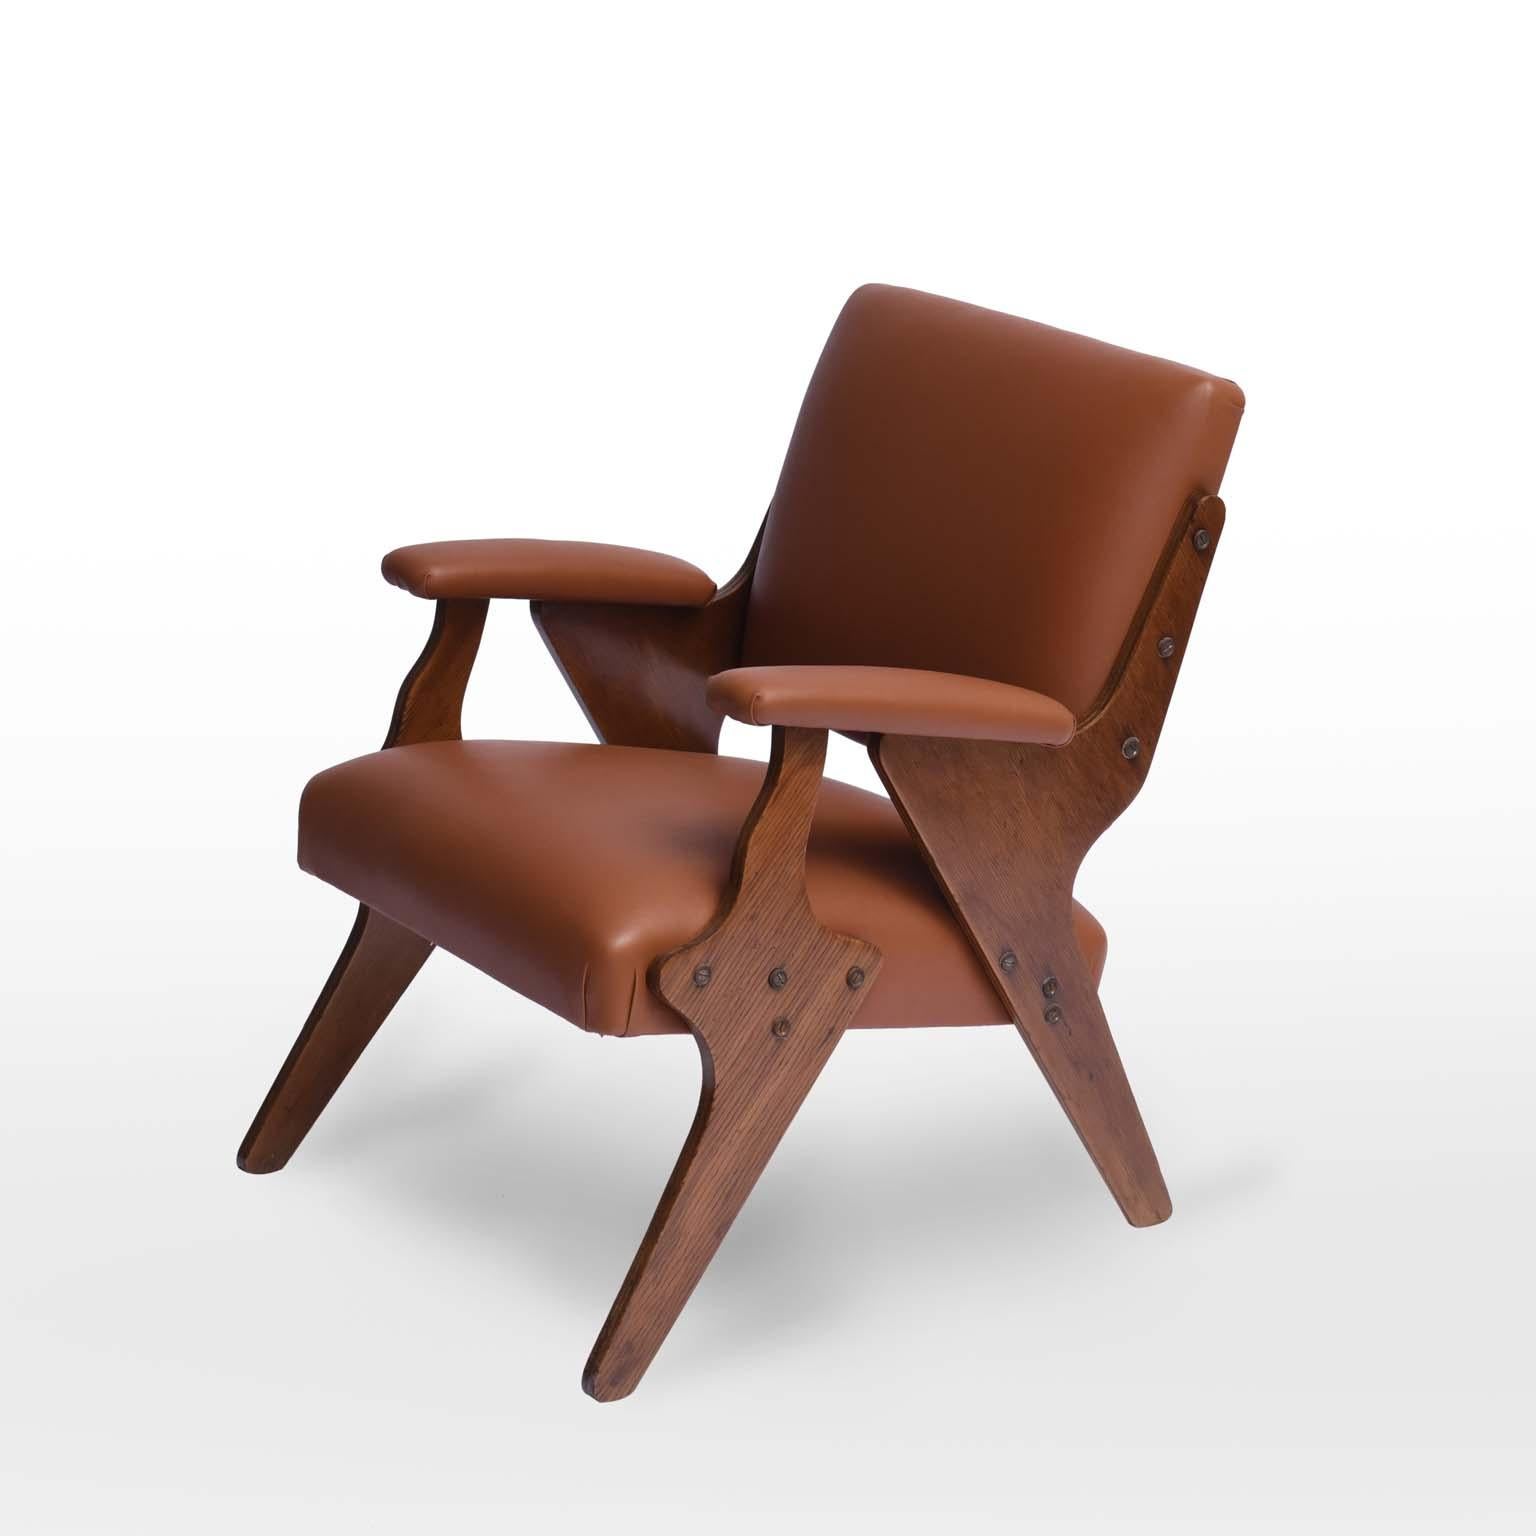 Zanine Caldas midcentury Brazilian armchair, 1950s.

With a structure in plywood, this unique model of armchair has as great differential the design of your feet.
The plywood sheet on its sides shows the beauty and care in choosing the material